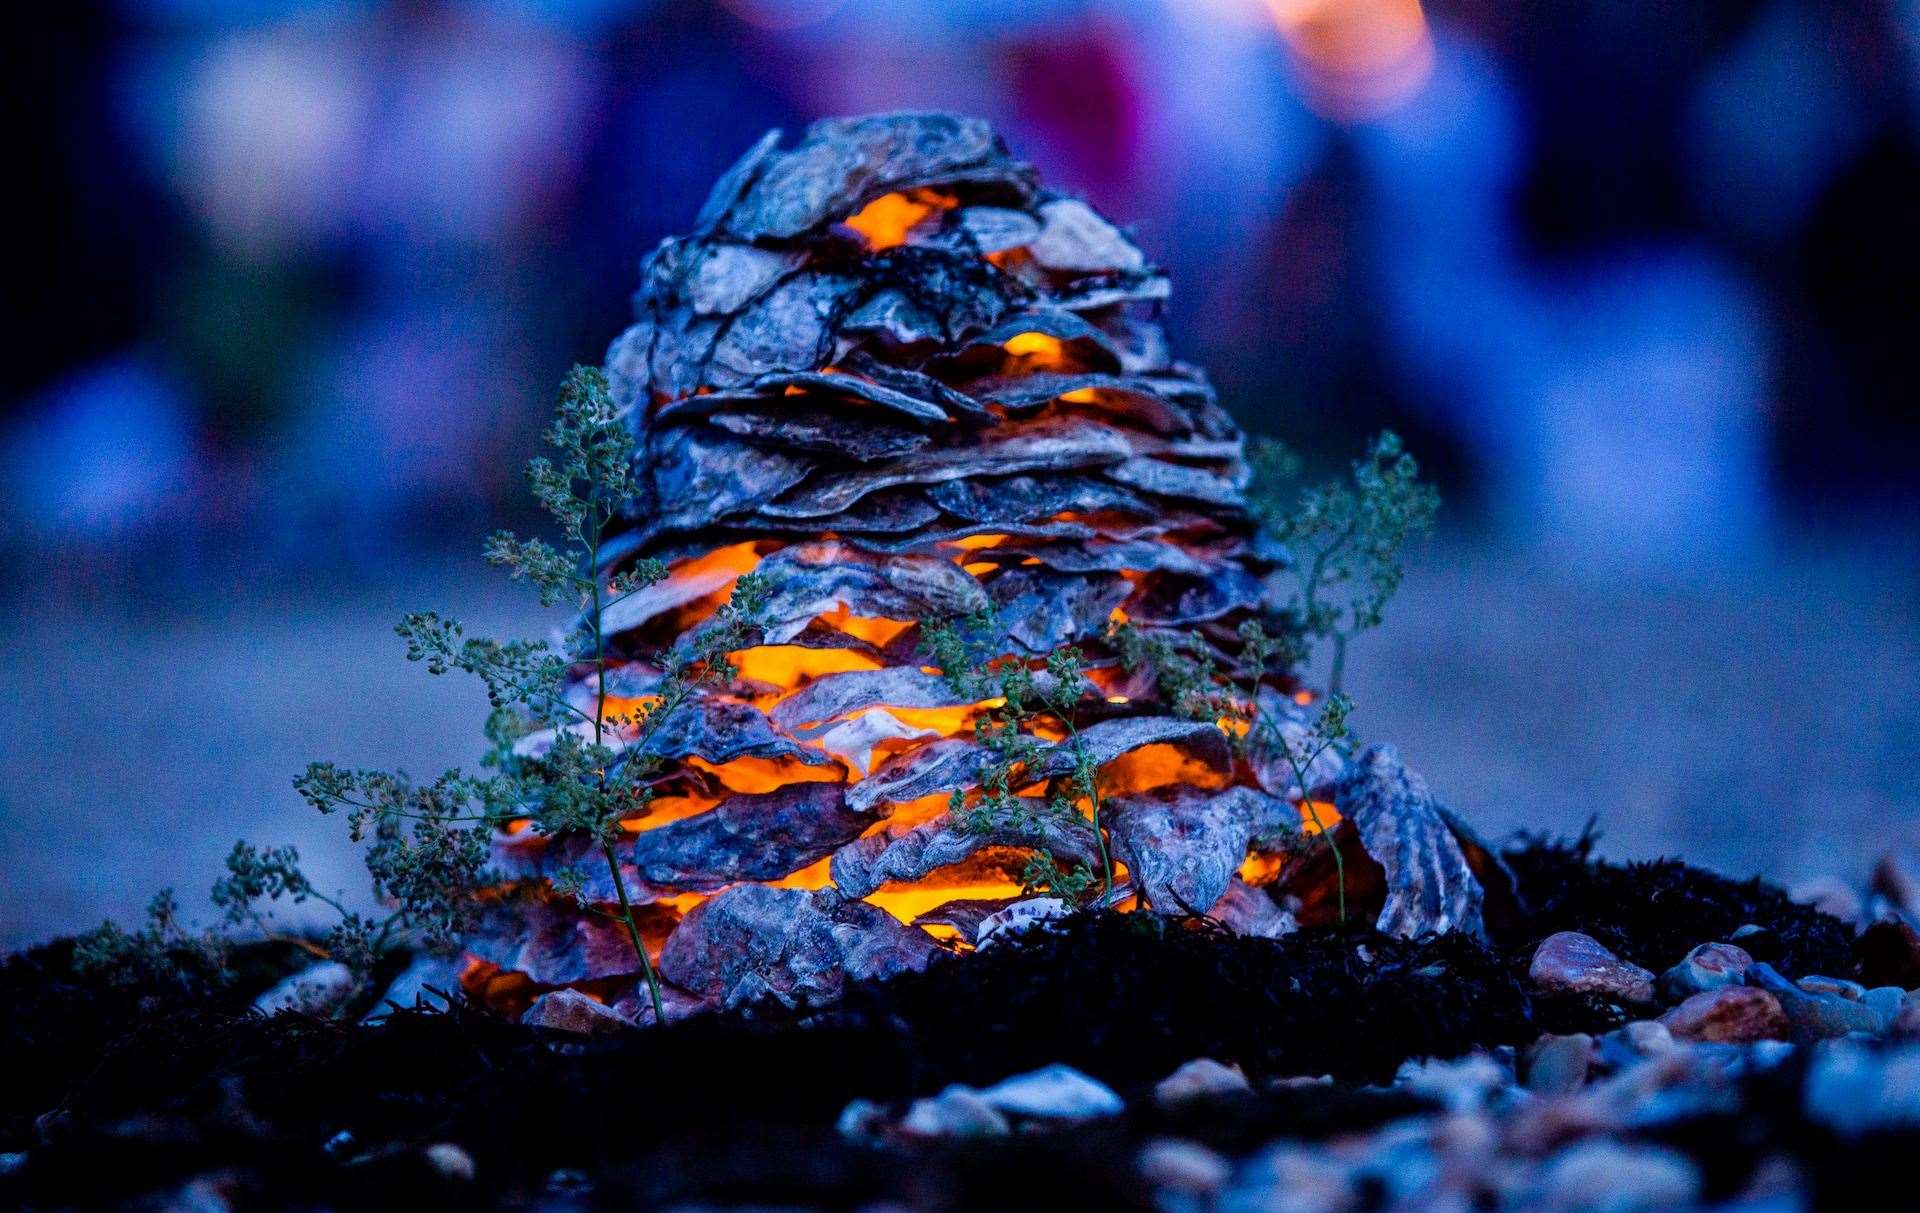 At the event you can learn to build a grotter, a structure built with oyster shells and lit with a candle. Picture: Peter Hawley